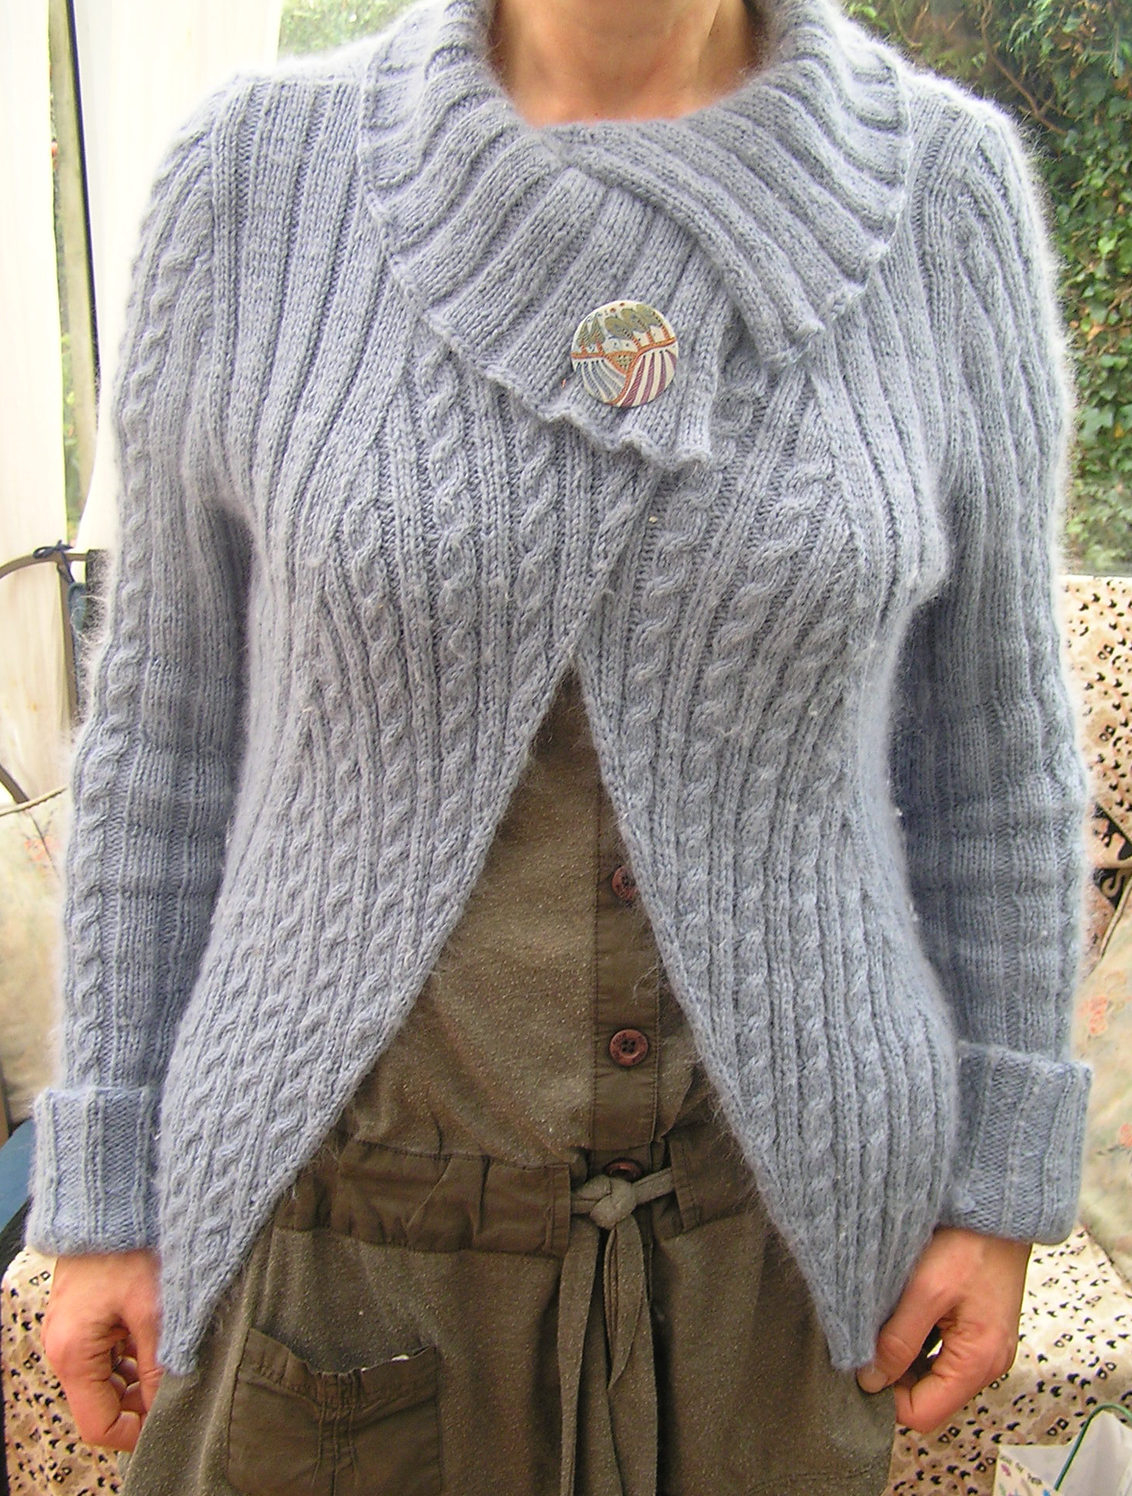 Knitted Jacket Patterns Wrap Cardigan Knitting Patterns In The Loop Knitting